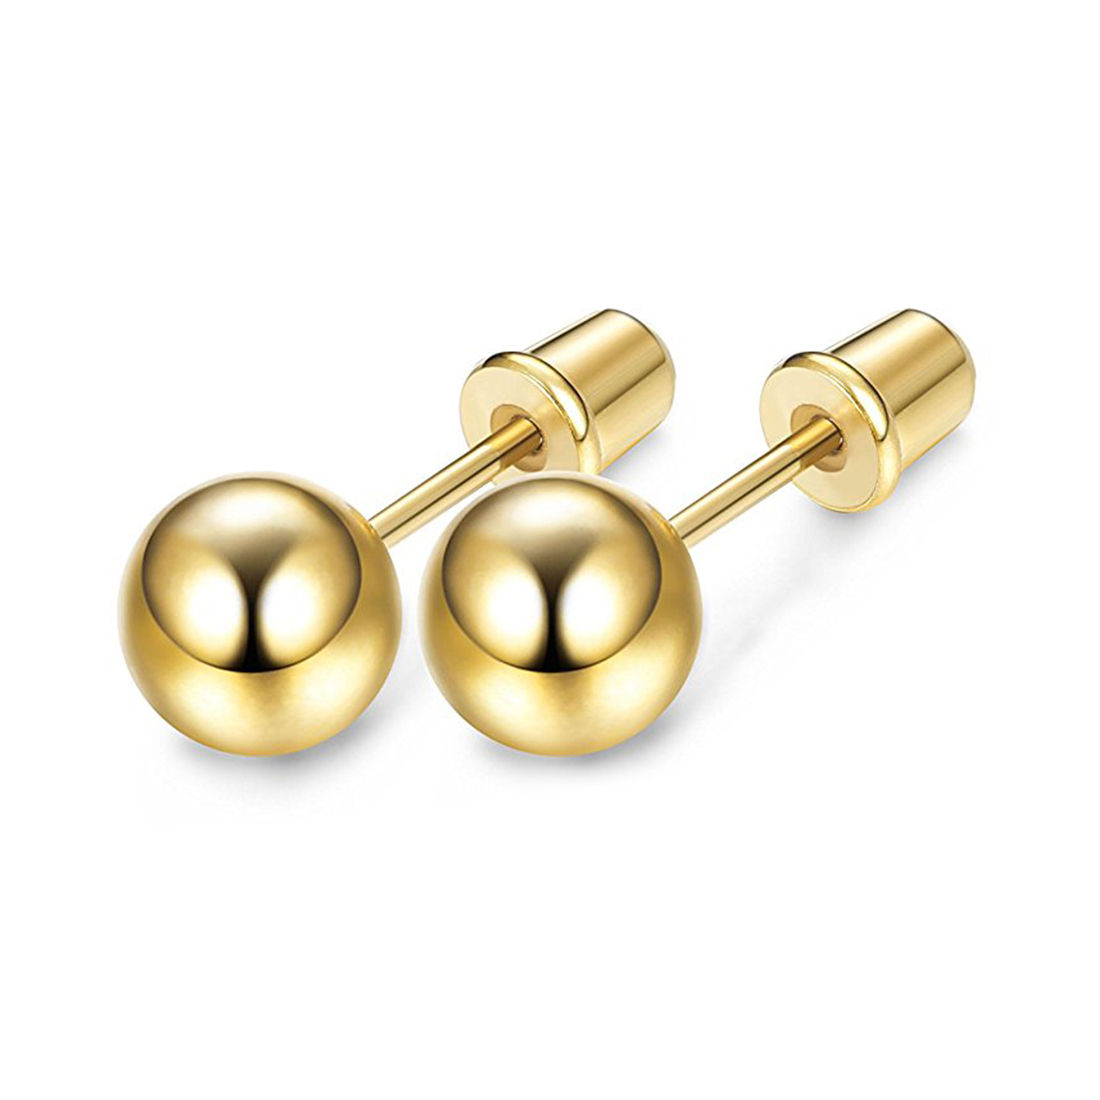 Buy Dainty Ball Earrings 2mm3mm Ball Gold Studs Silver Gold Online in  India  Etsy